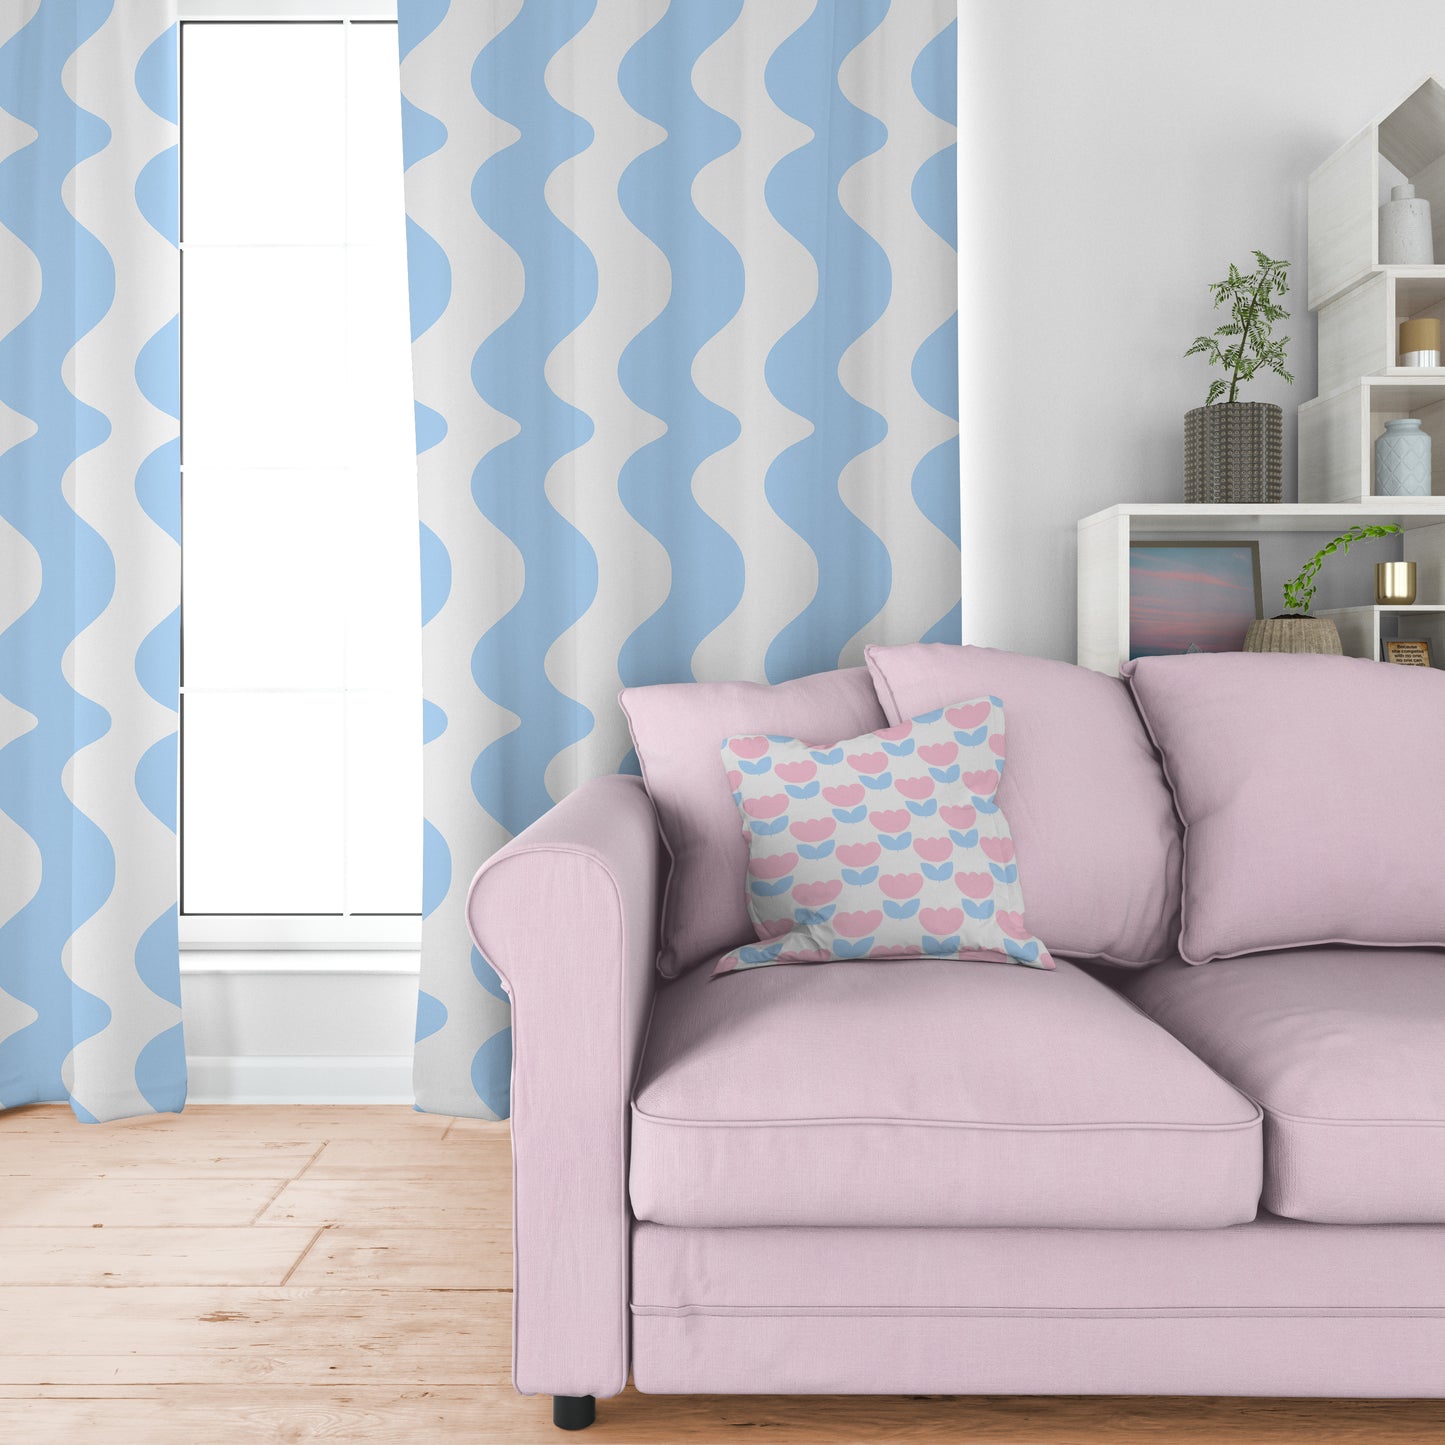 ‘On the Same Wavelength’ Fabric in Soft Blue